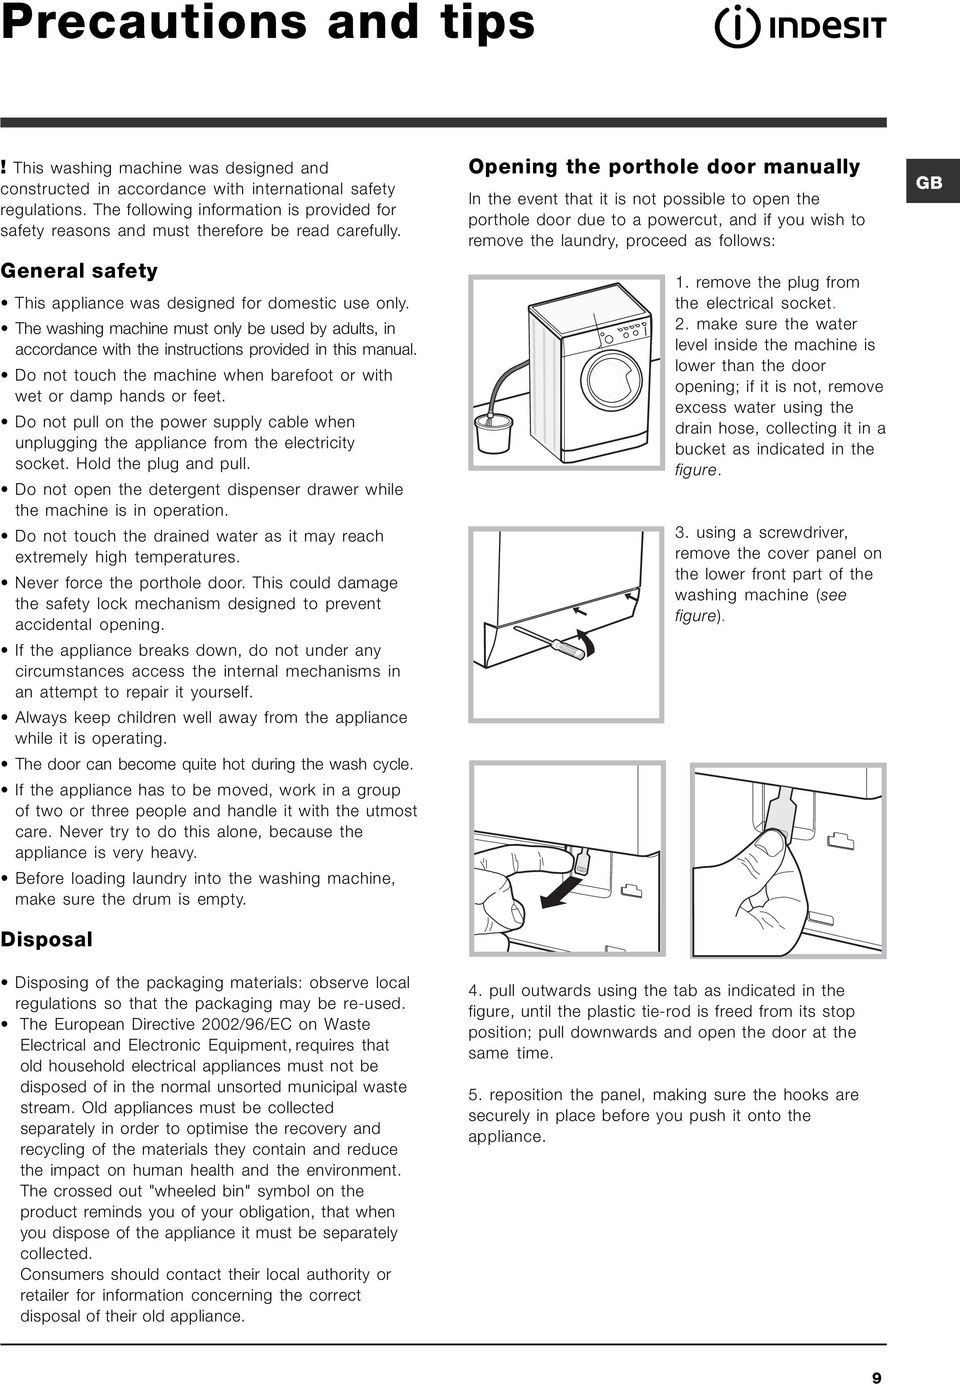 The washing machine must only be used by adults, in accordance with the instructions provided in this manual. Do not touch the machine when barefoot or with wet or damp hands or feet.